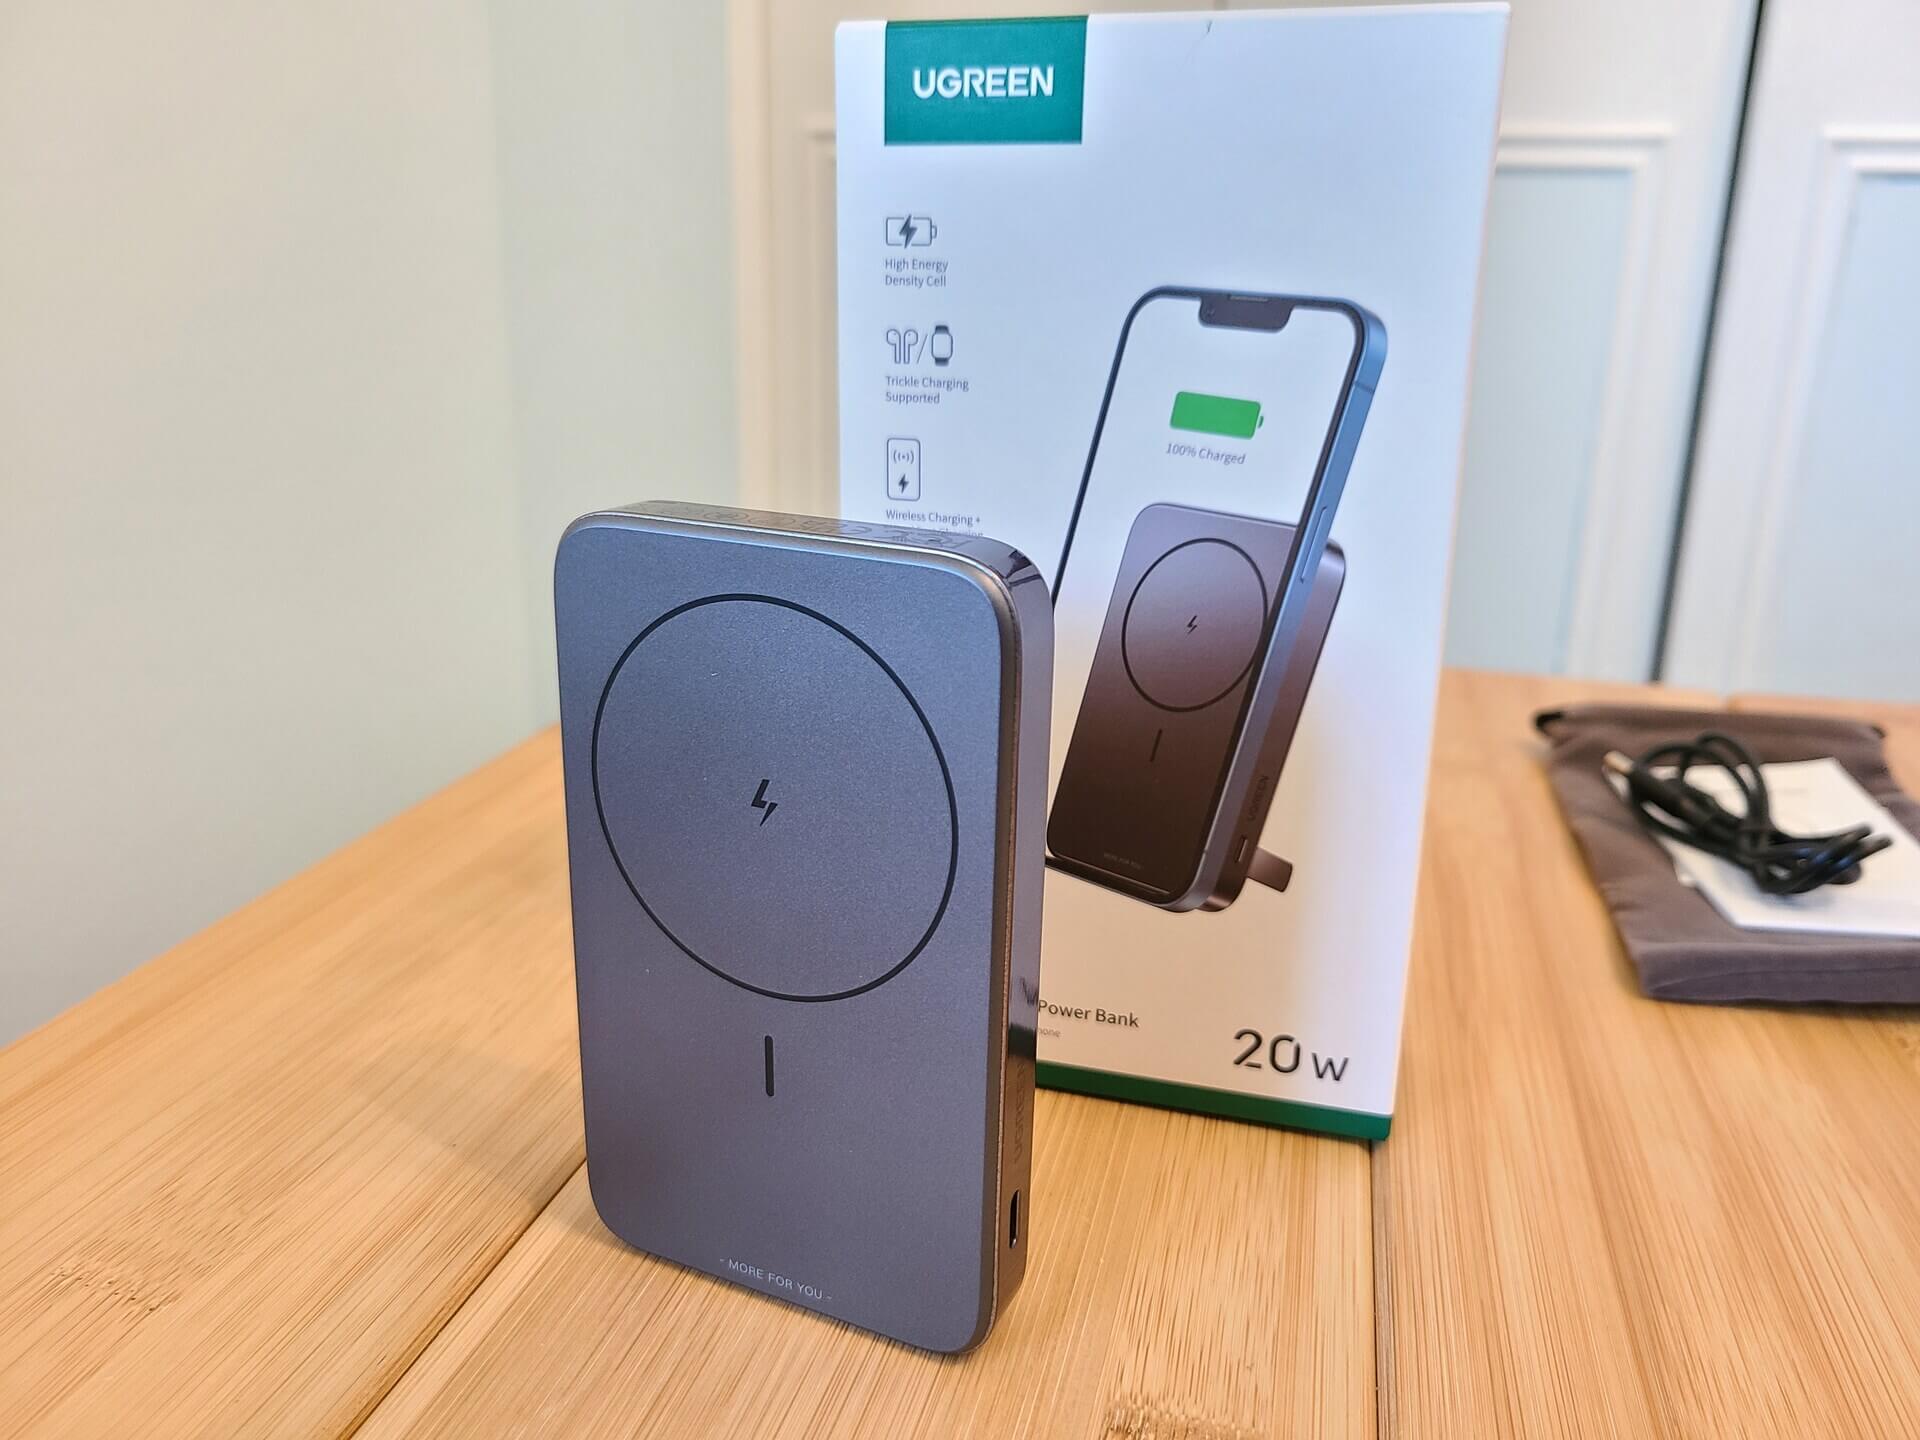 UGREEN Magnetic 10,000mAh 20W PD Power Bank Review